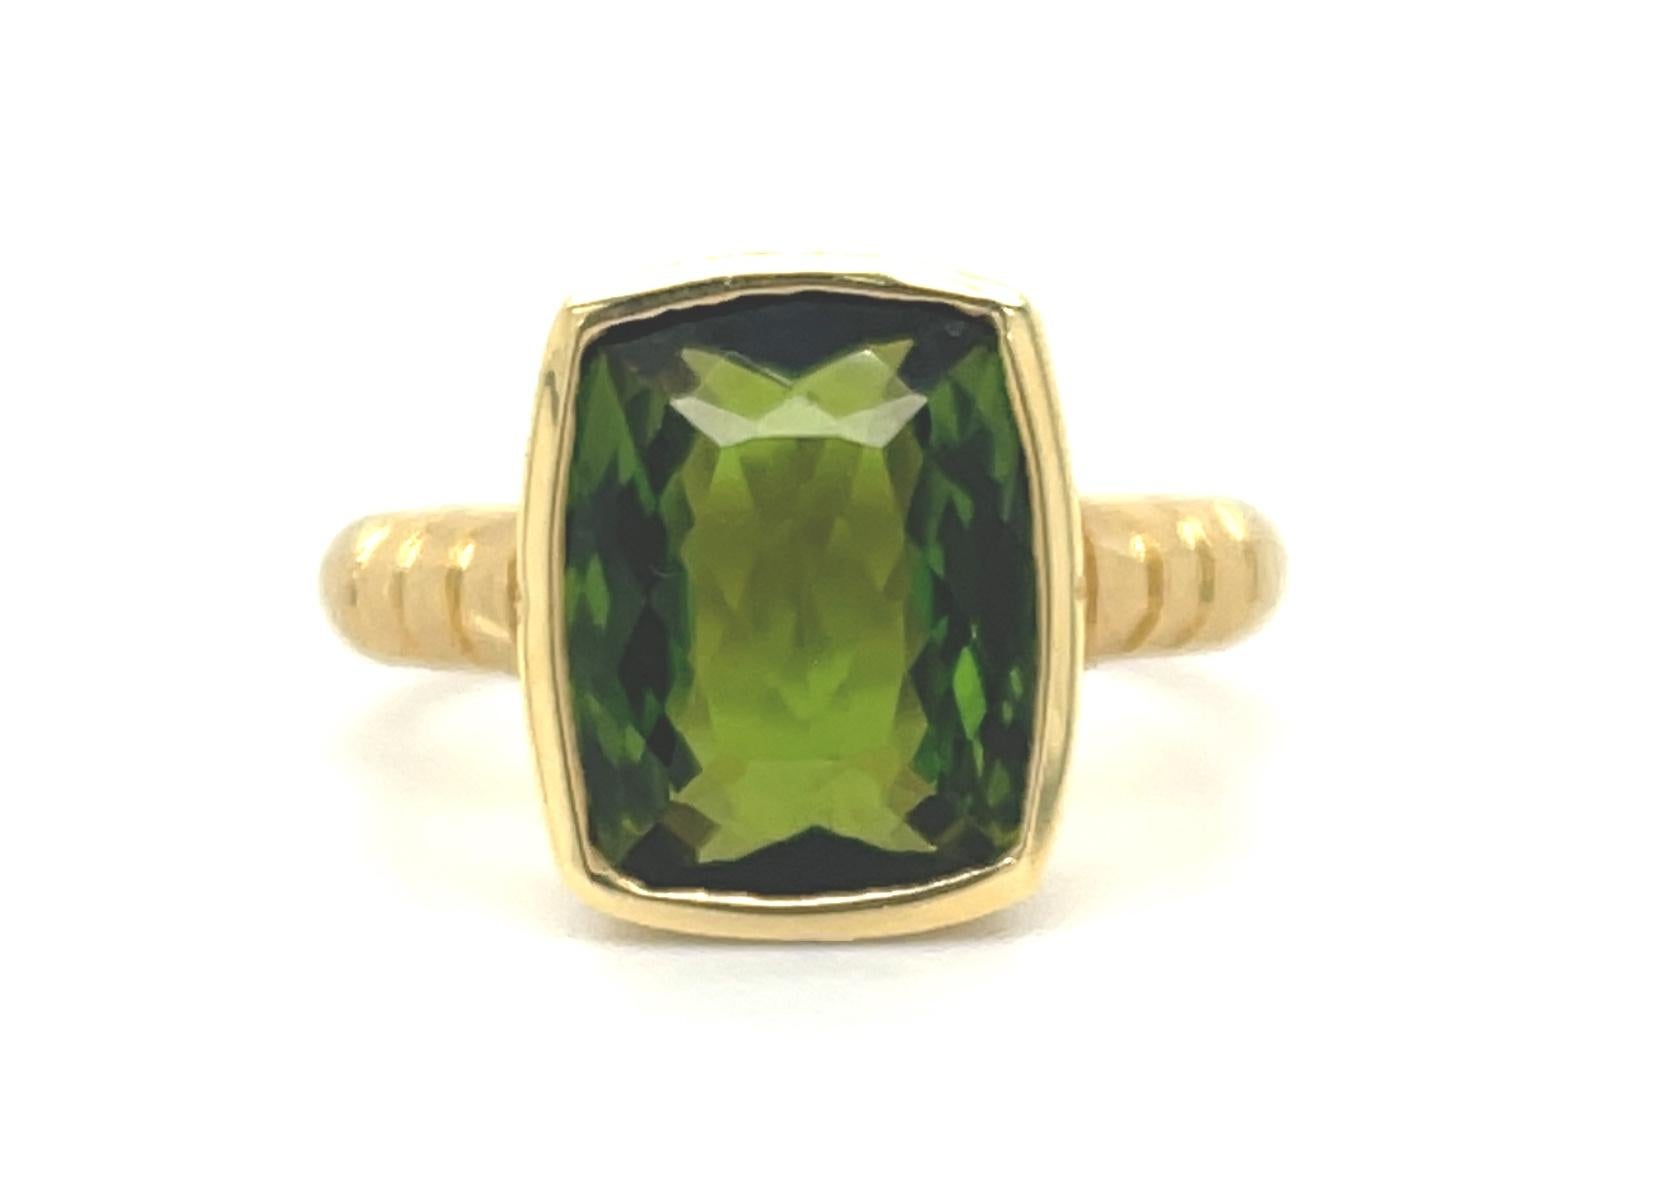 This beautifully designed ring features a 4.40 carat cushion-cut green tourmaline set in a handmade 18k yellow gold bezel with sparkling diamond accents. The center stone has bright, medium green color and 